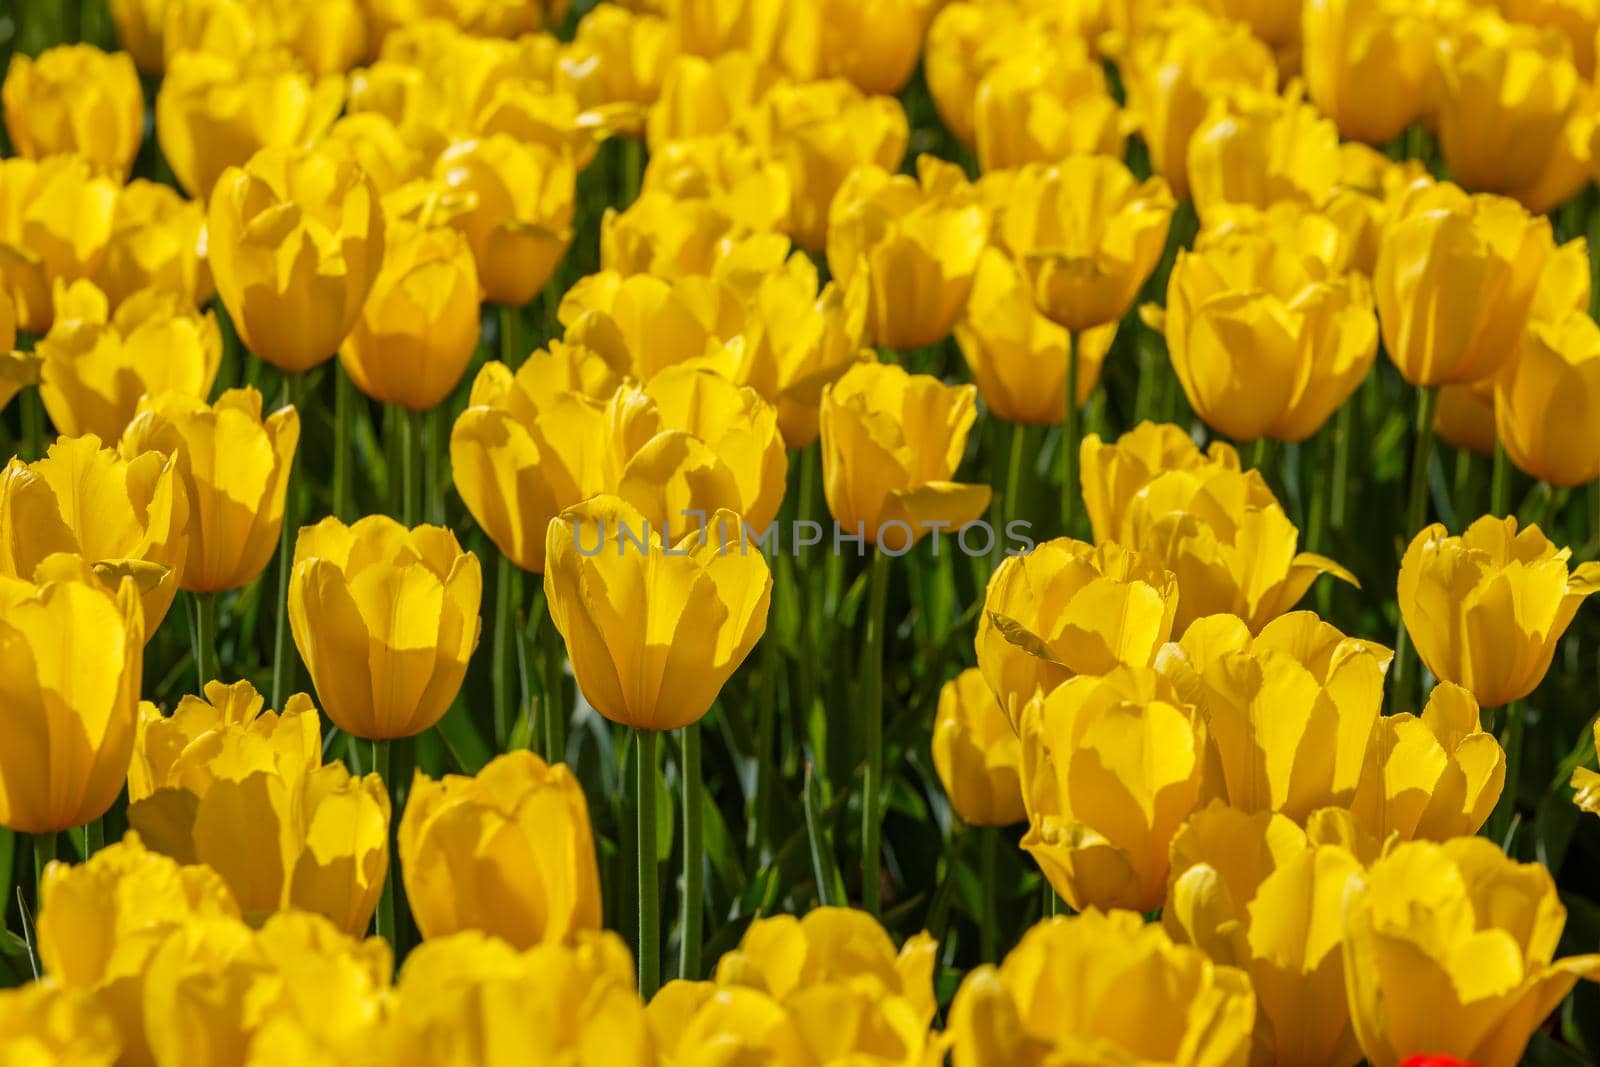 flaccid yellow tulips in the field at spring daylight - close-up full frame background with selective focus